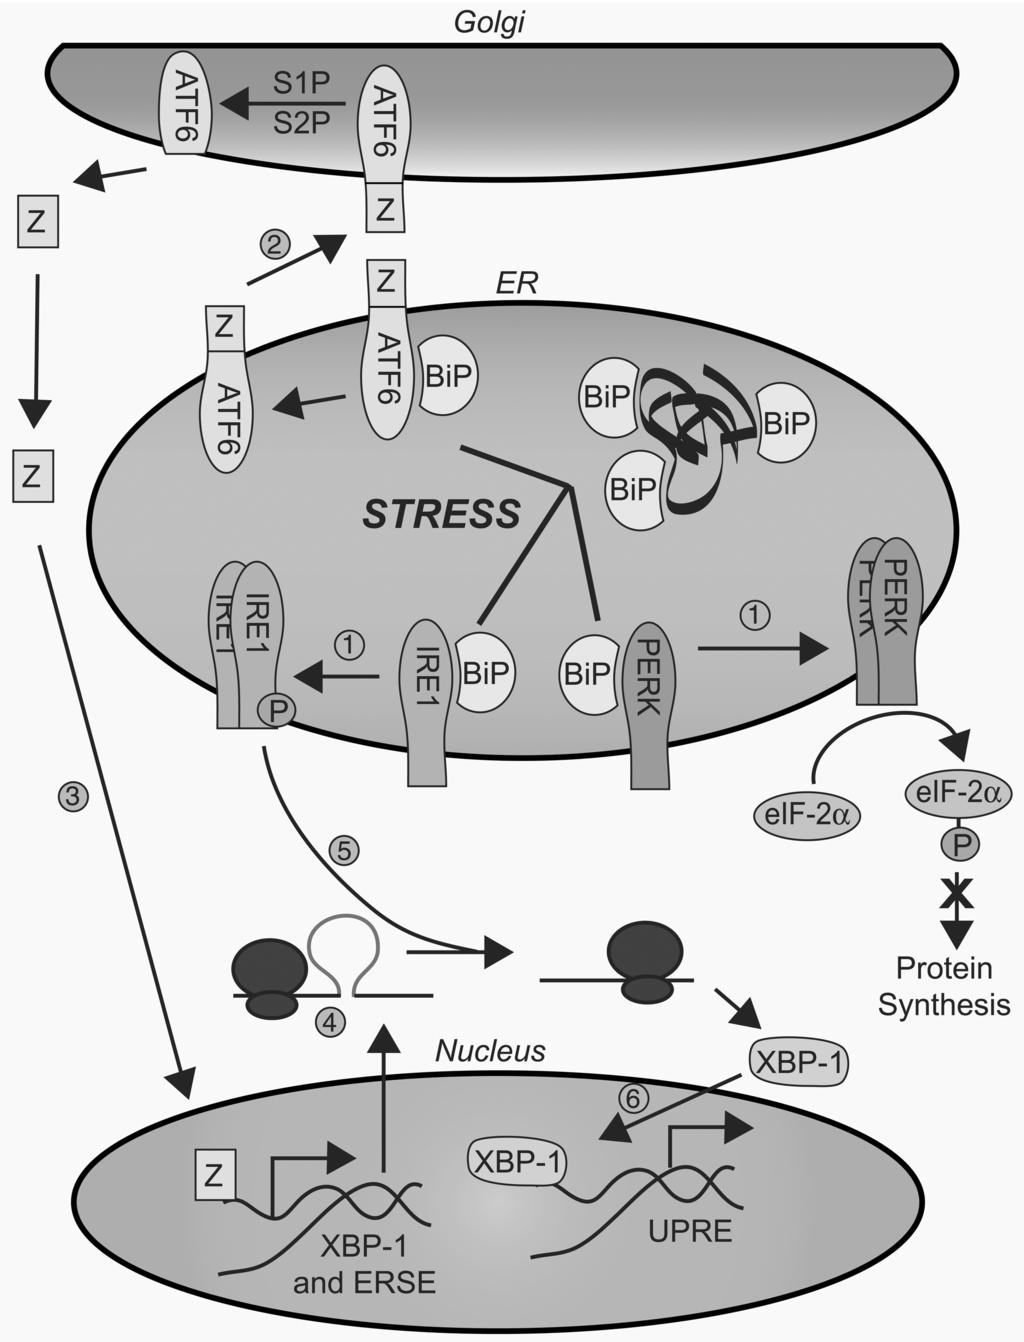 124 Daniels et al. Fig. 4. The mammalian UPR pathway. In the absence of ER stress, BiP remains bound to three distinct ER transmembrane receptors: IRE1, ATF6, and PERK.